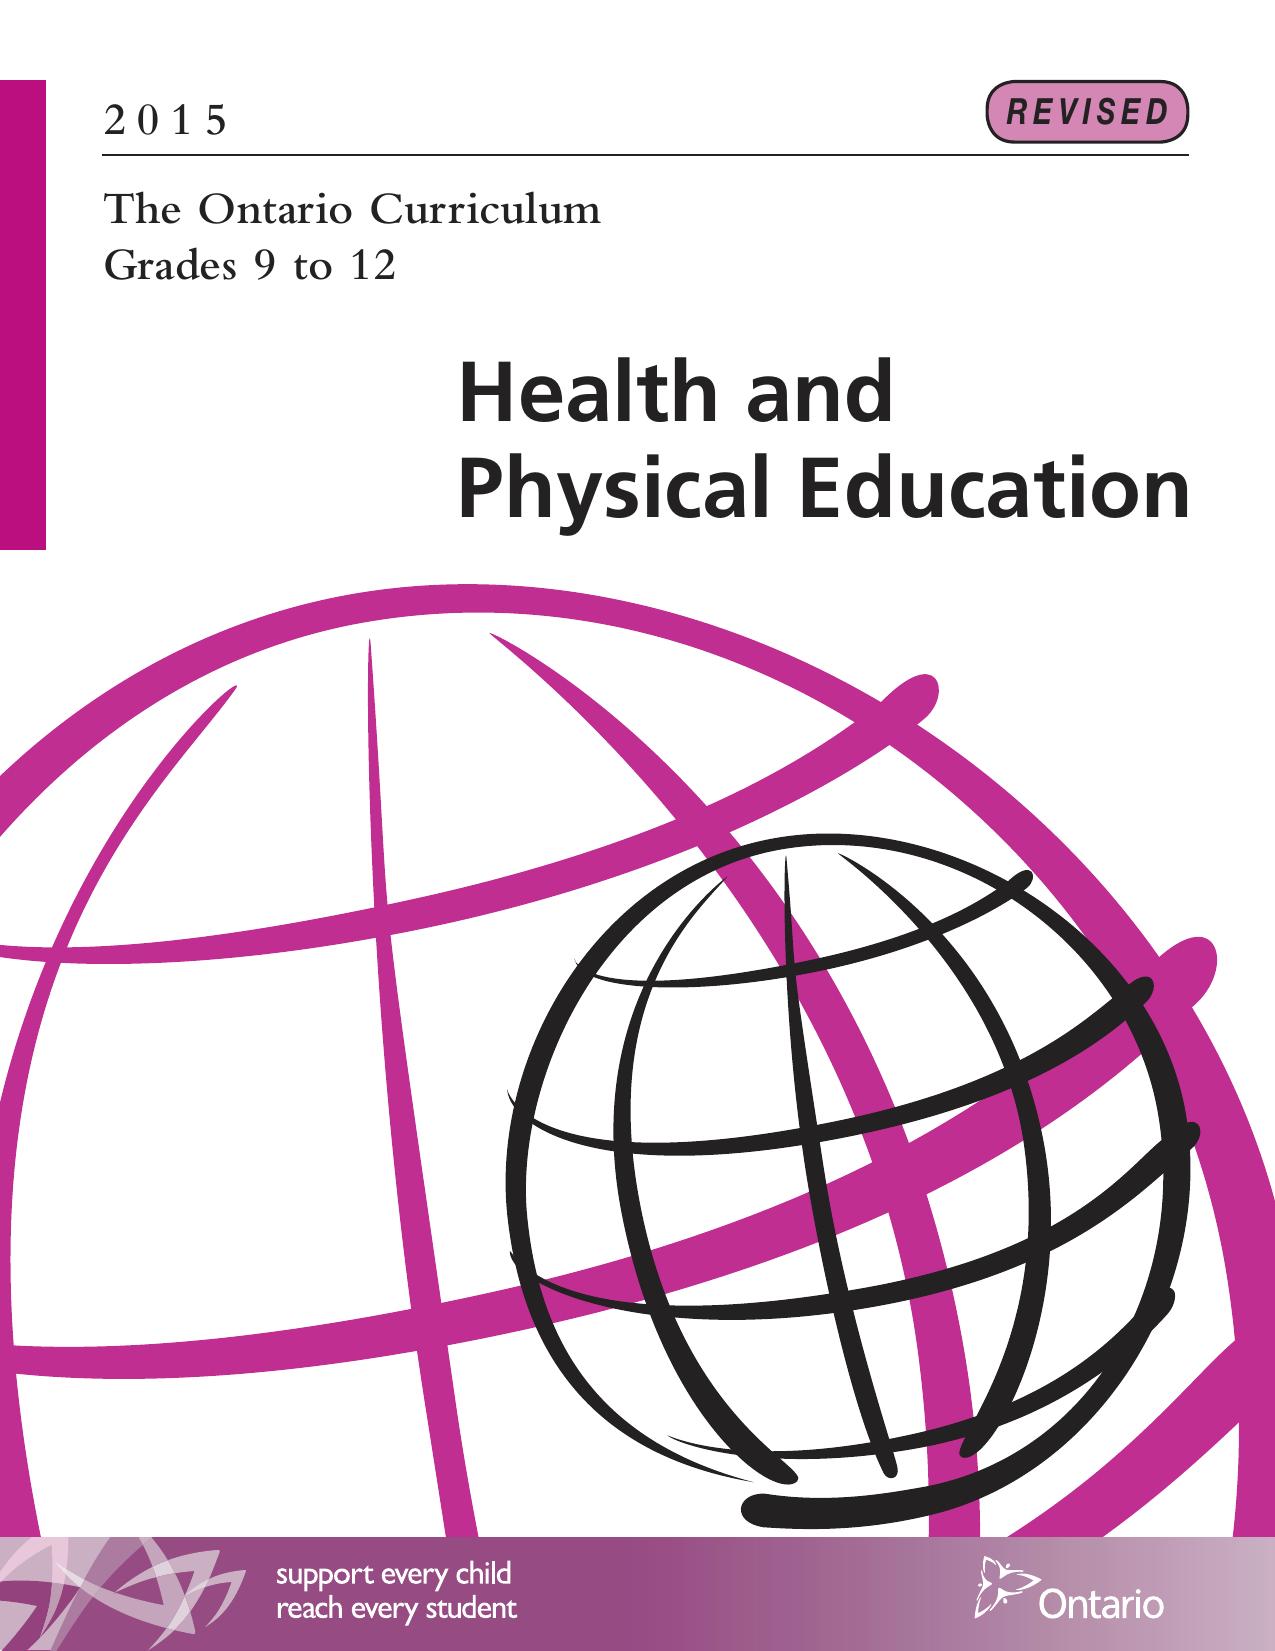 The Ontario Curriculum, Grades 9-12: Health and Physical Education, 2015 - revised